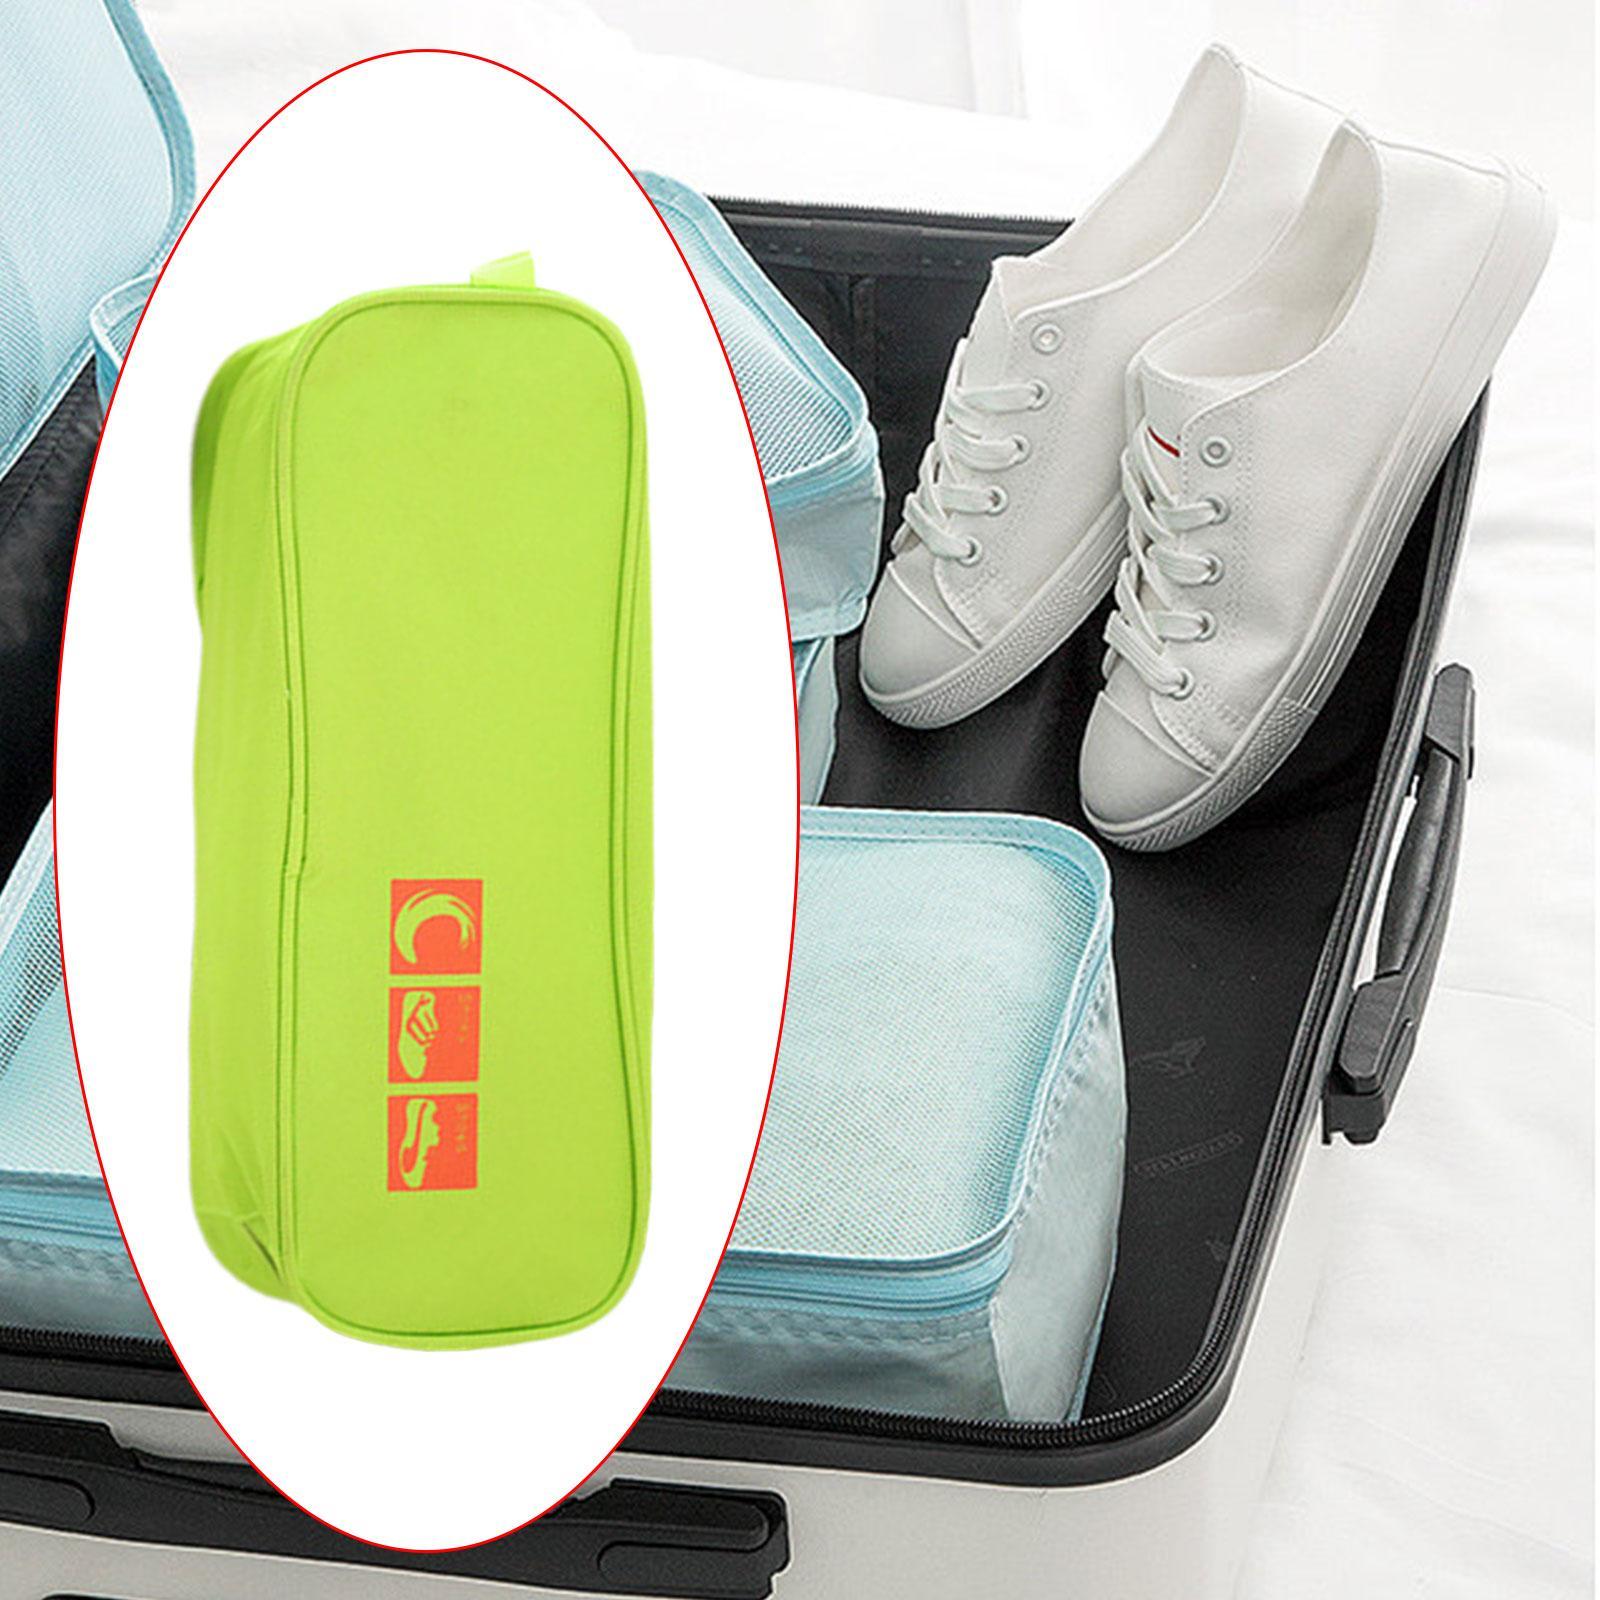 Travel  for Packing Shoe Pouch Lightweight Dustproof with Zipper Oxford Fabric Shoe Organizer Bag Shoe Storage Bag for Home Vacation